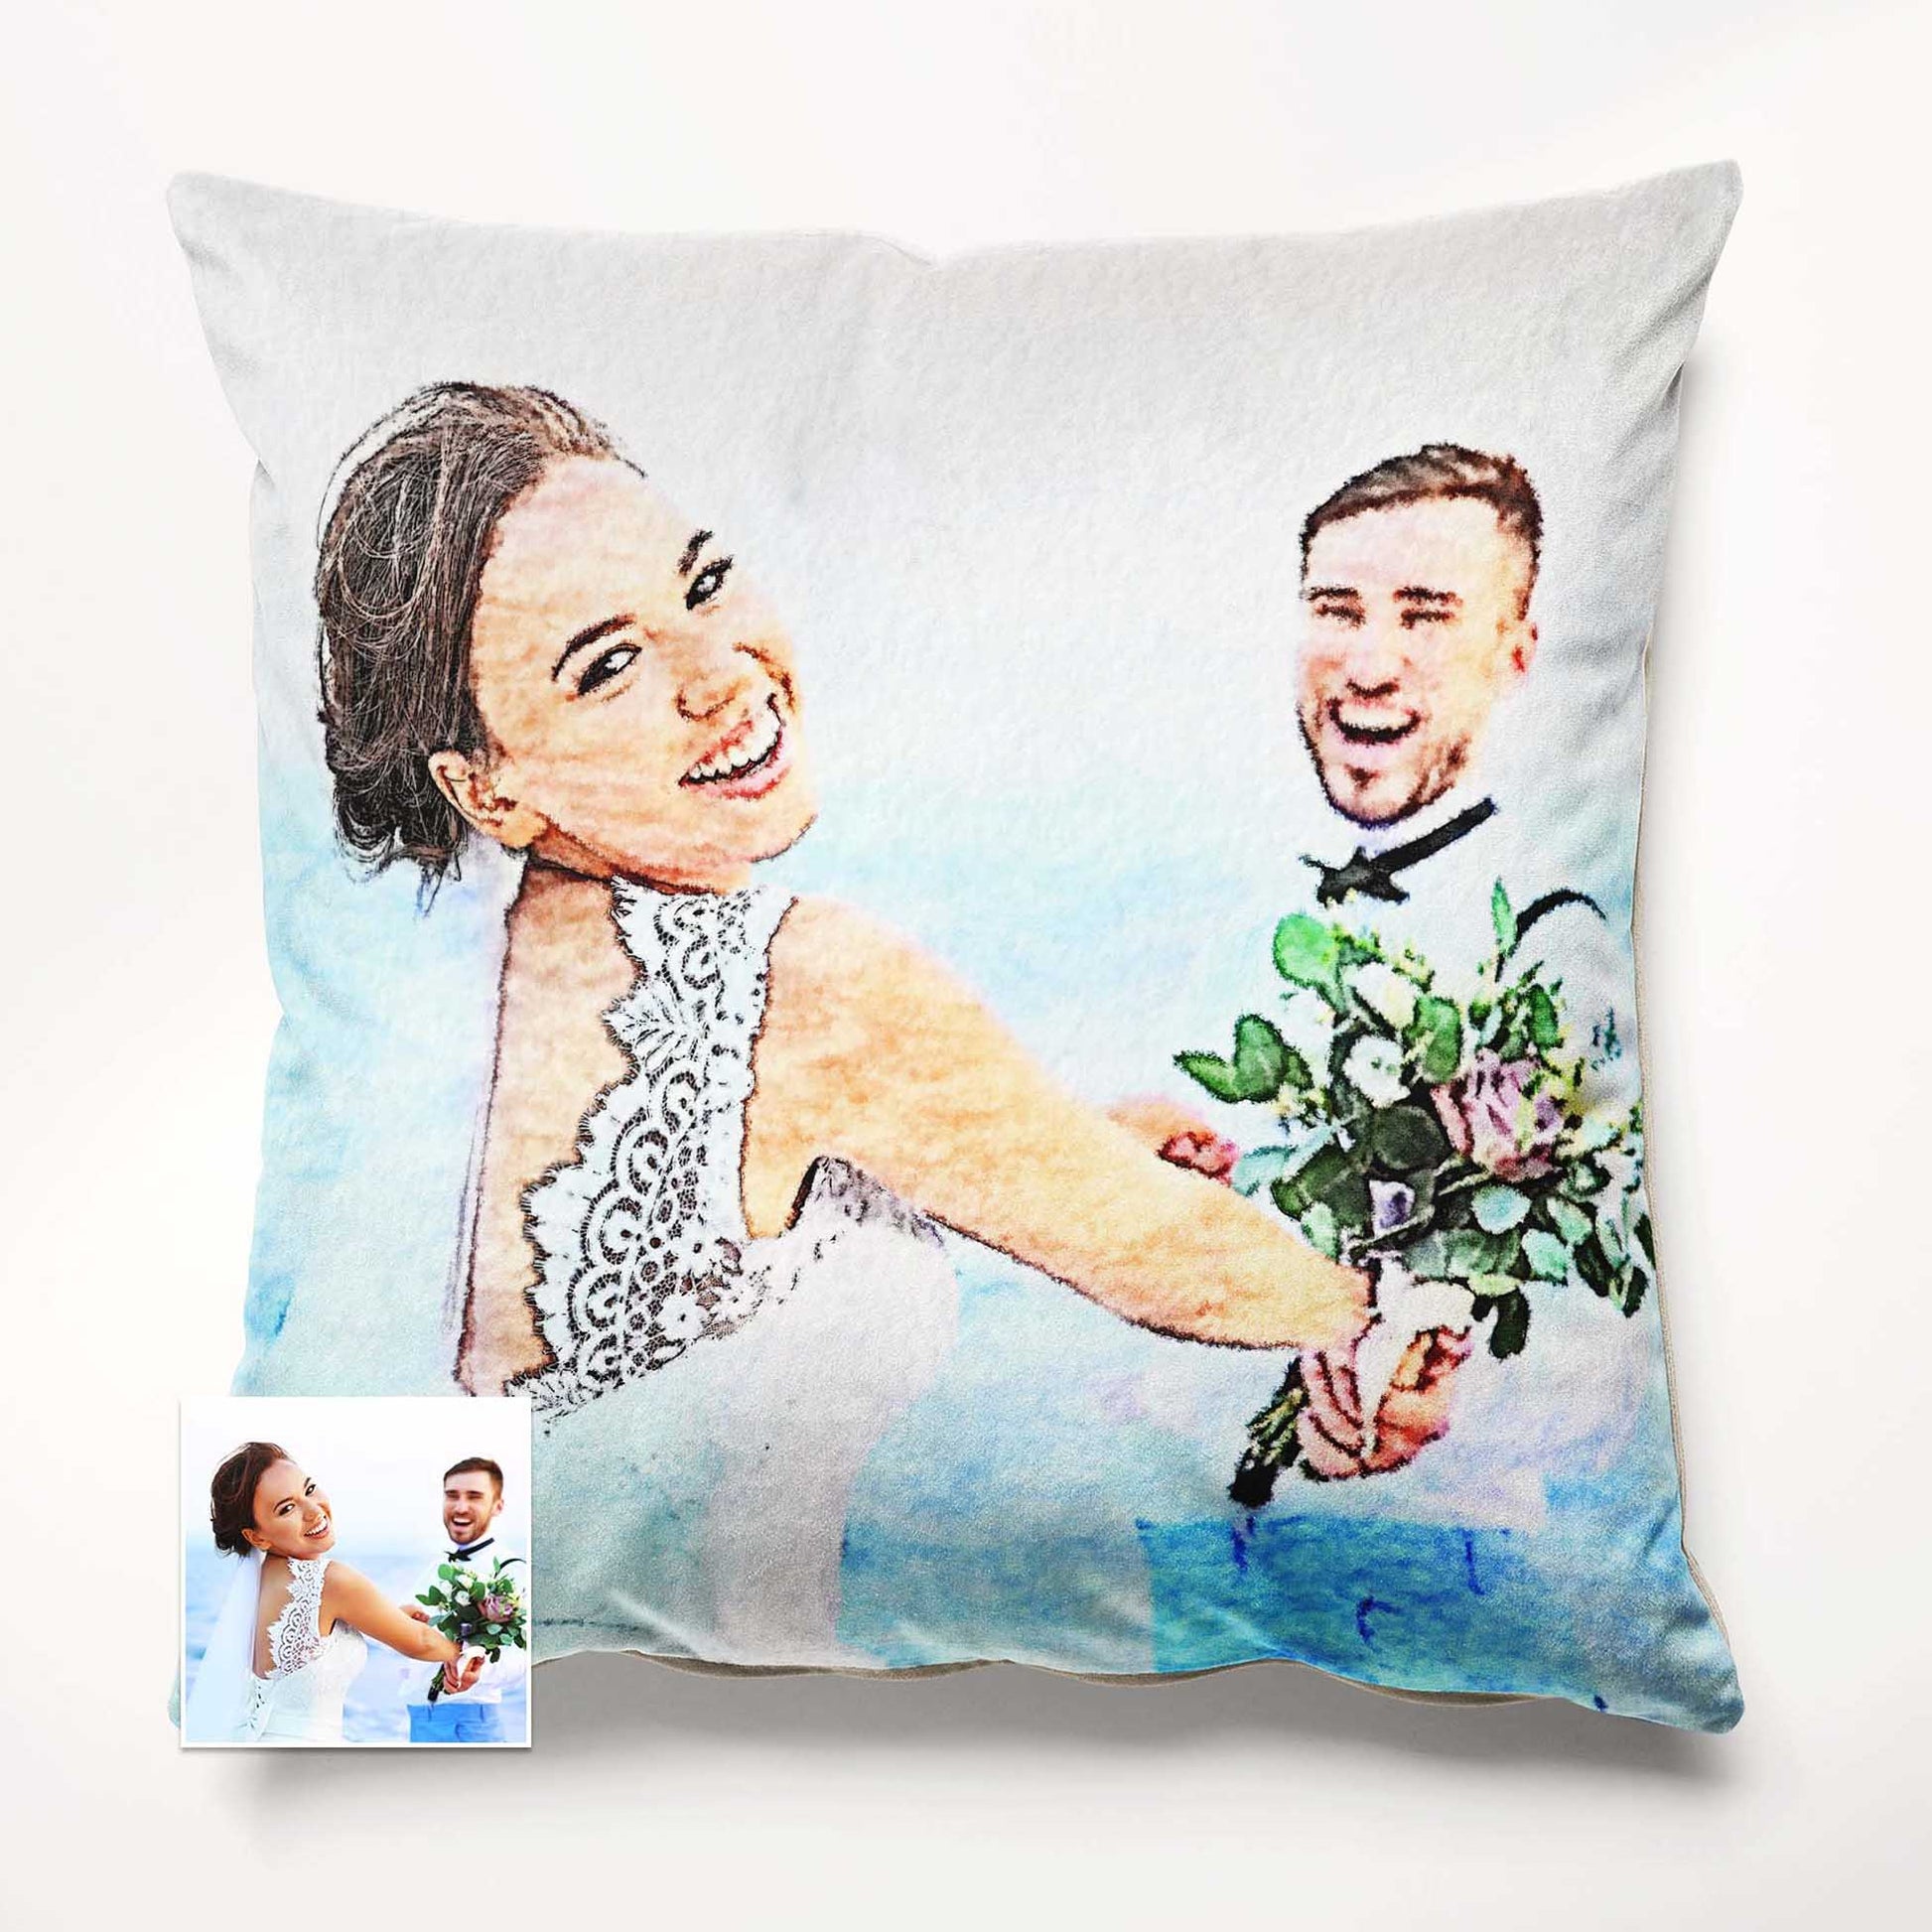 Elevate your home decor with a personalized watercolor painting cushion. Printed from your photo, this soft furnishing is crafted with luxurious velvet fabric, adding a touch of natural beauty to your space